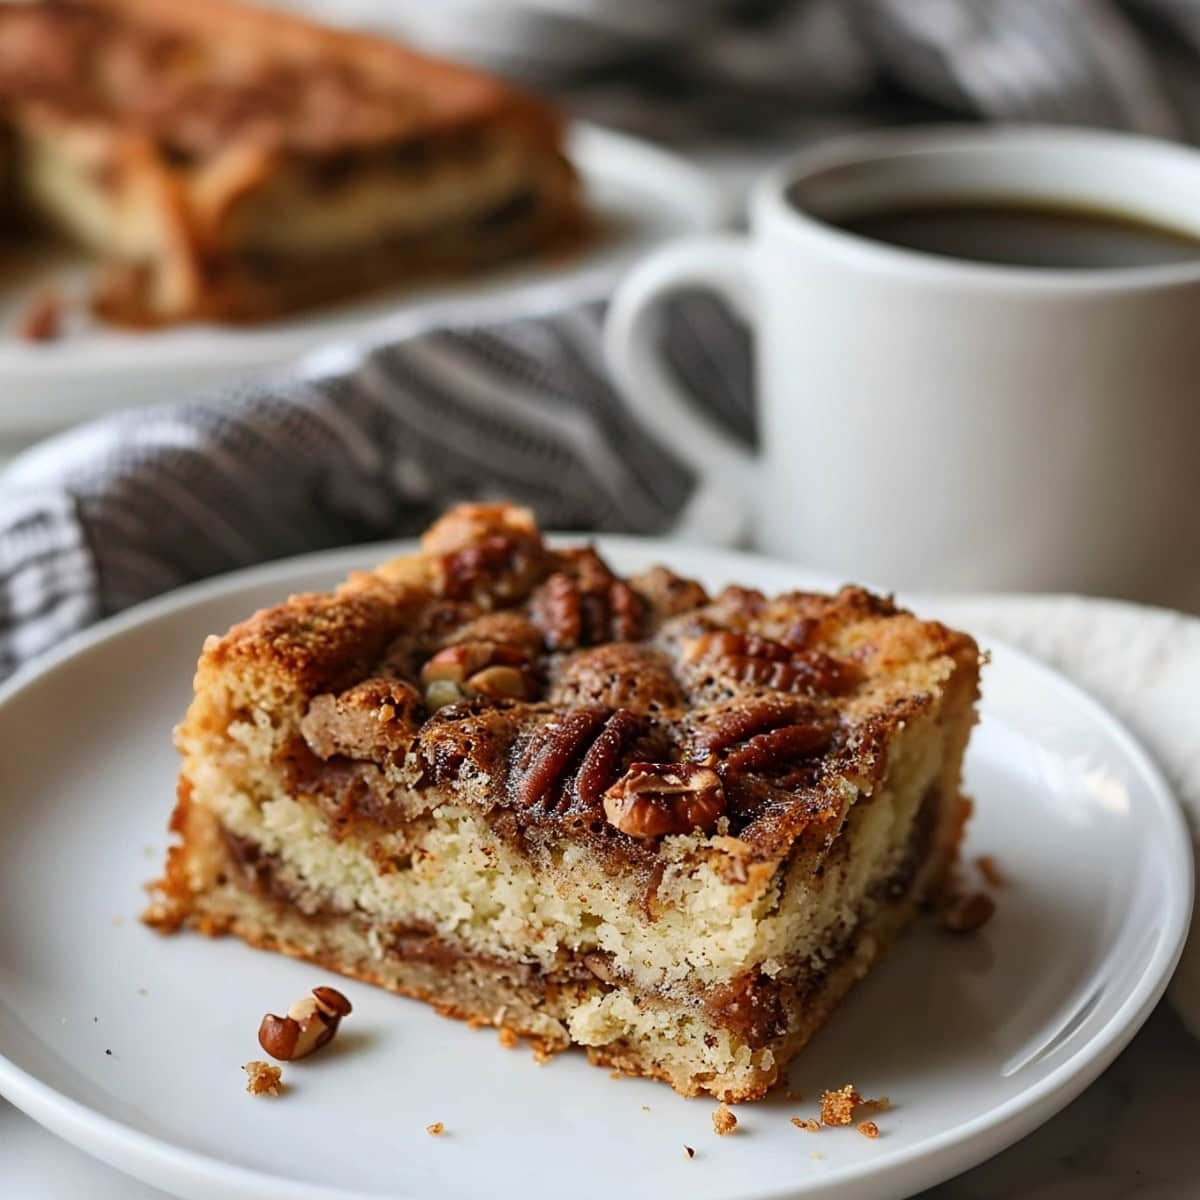 Close up of Sour Cream Coffee Cake with Pecans on a Plate with a Mug of Coffee and More Slices of Cake in the Background